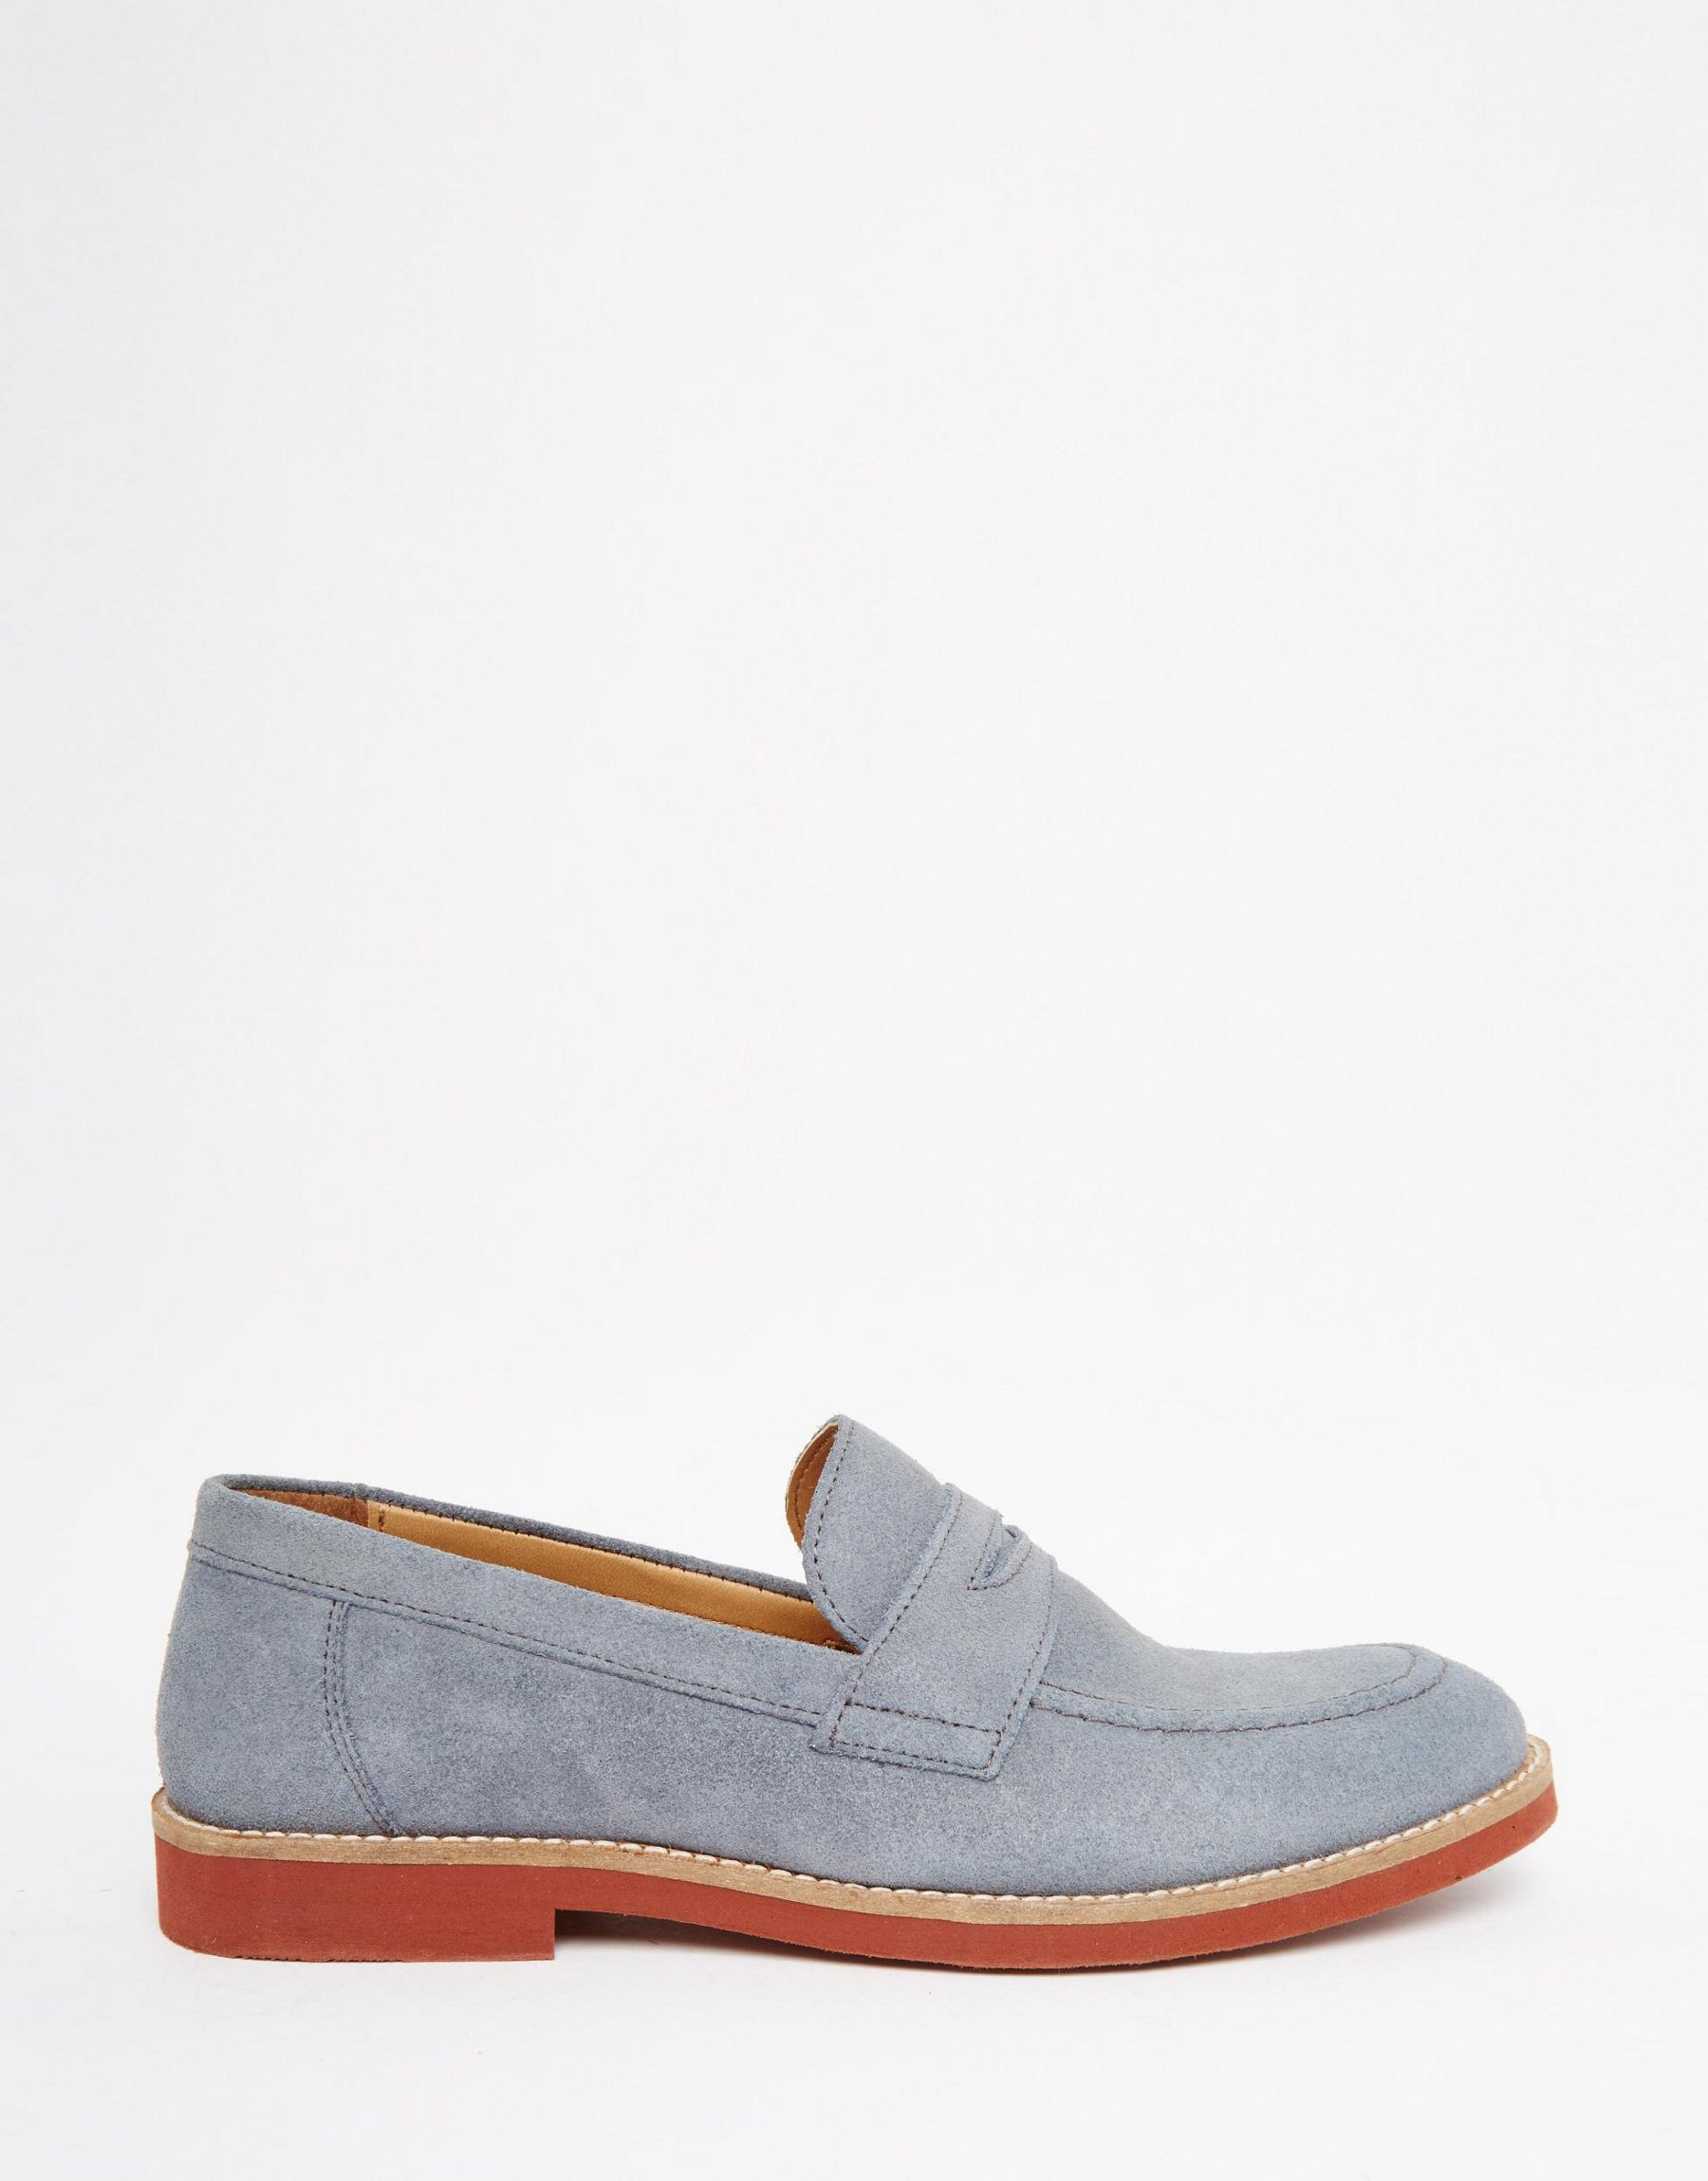 ASOS Penny Loafers In Blue Suede in Blue for Men - Lyst